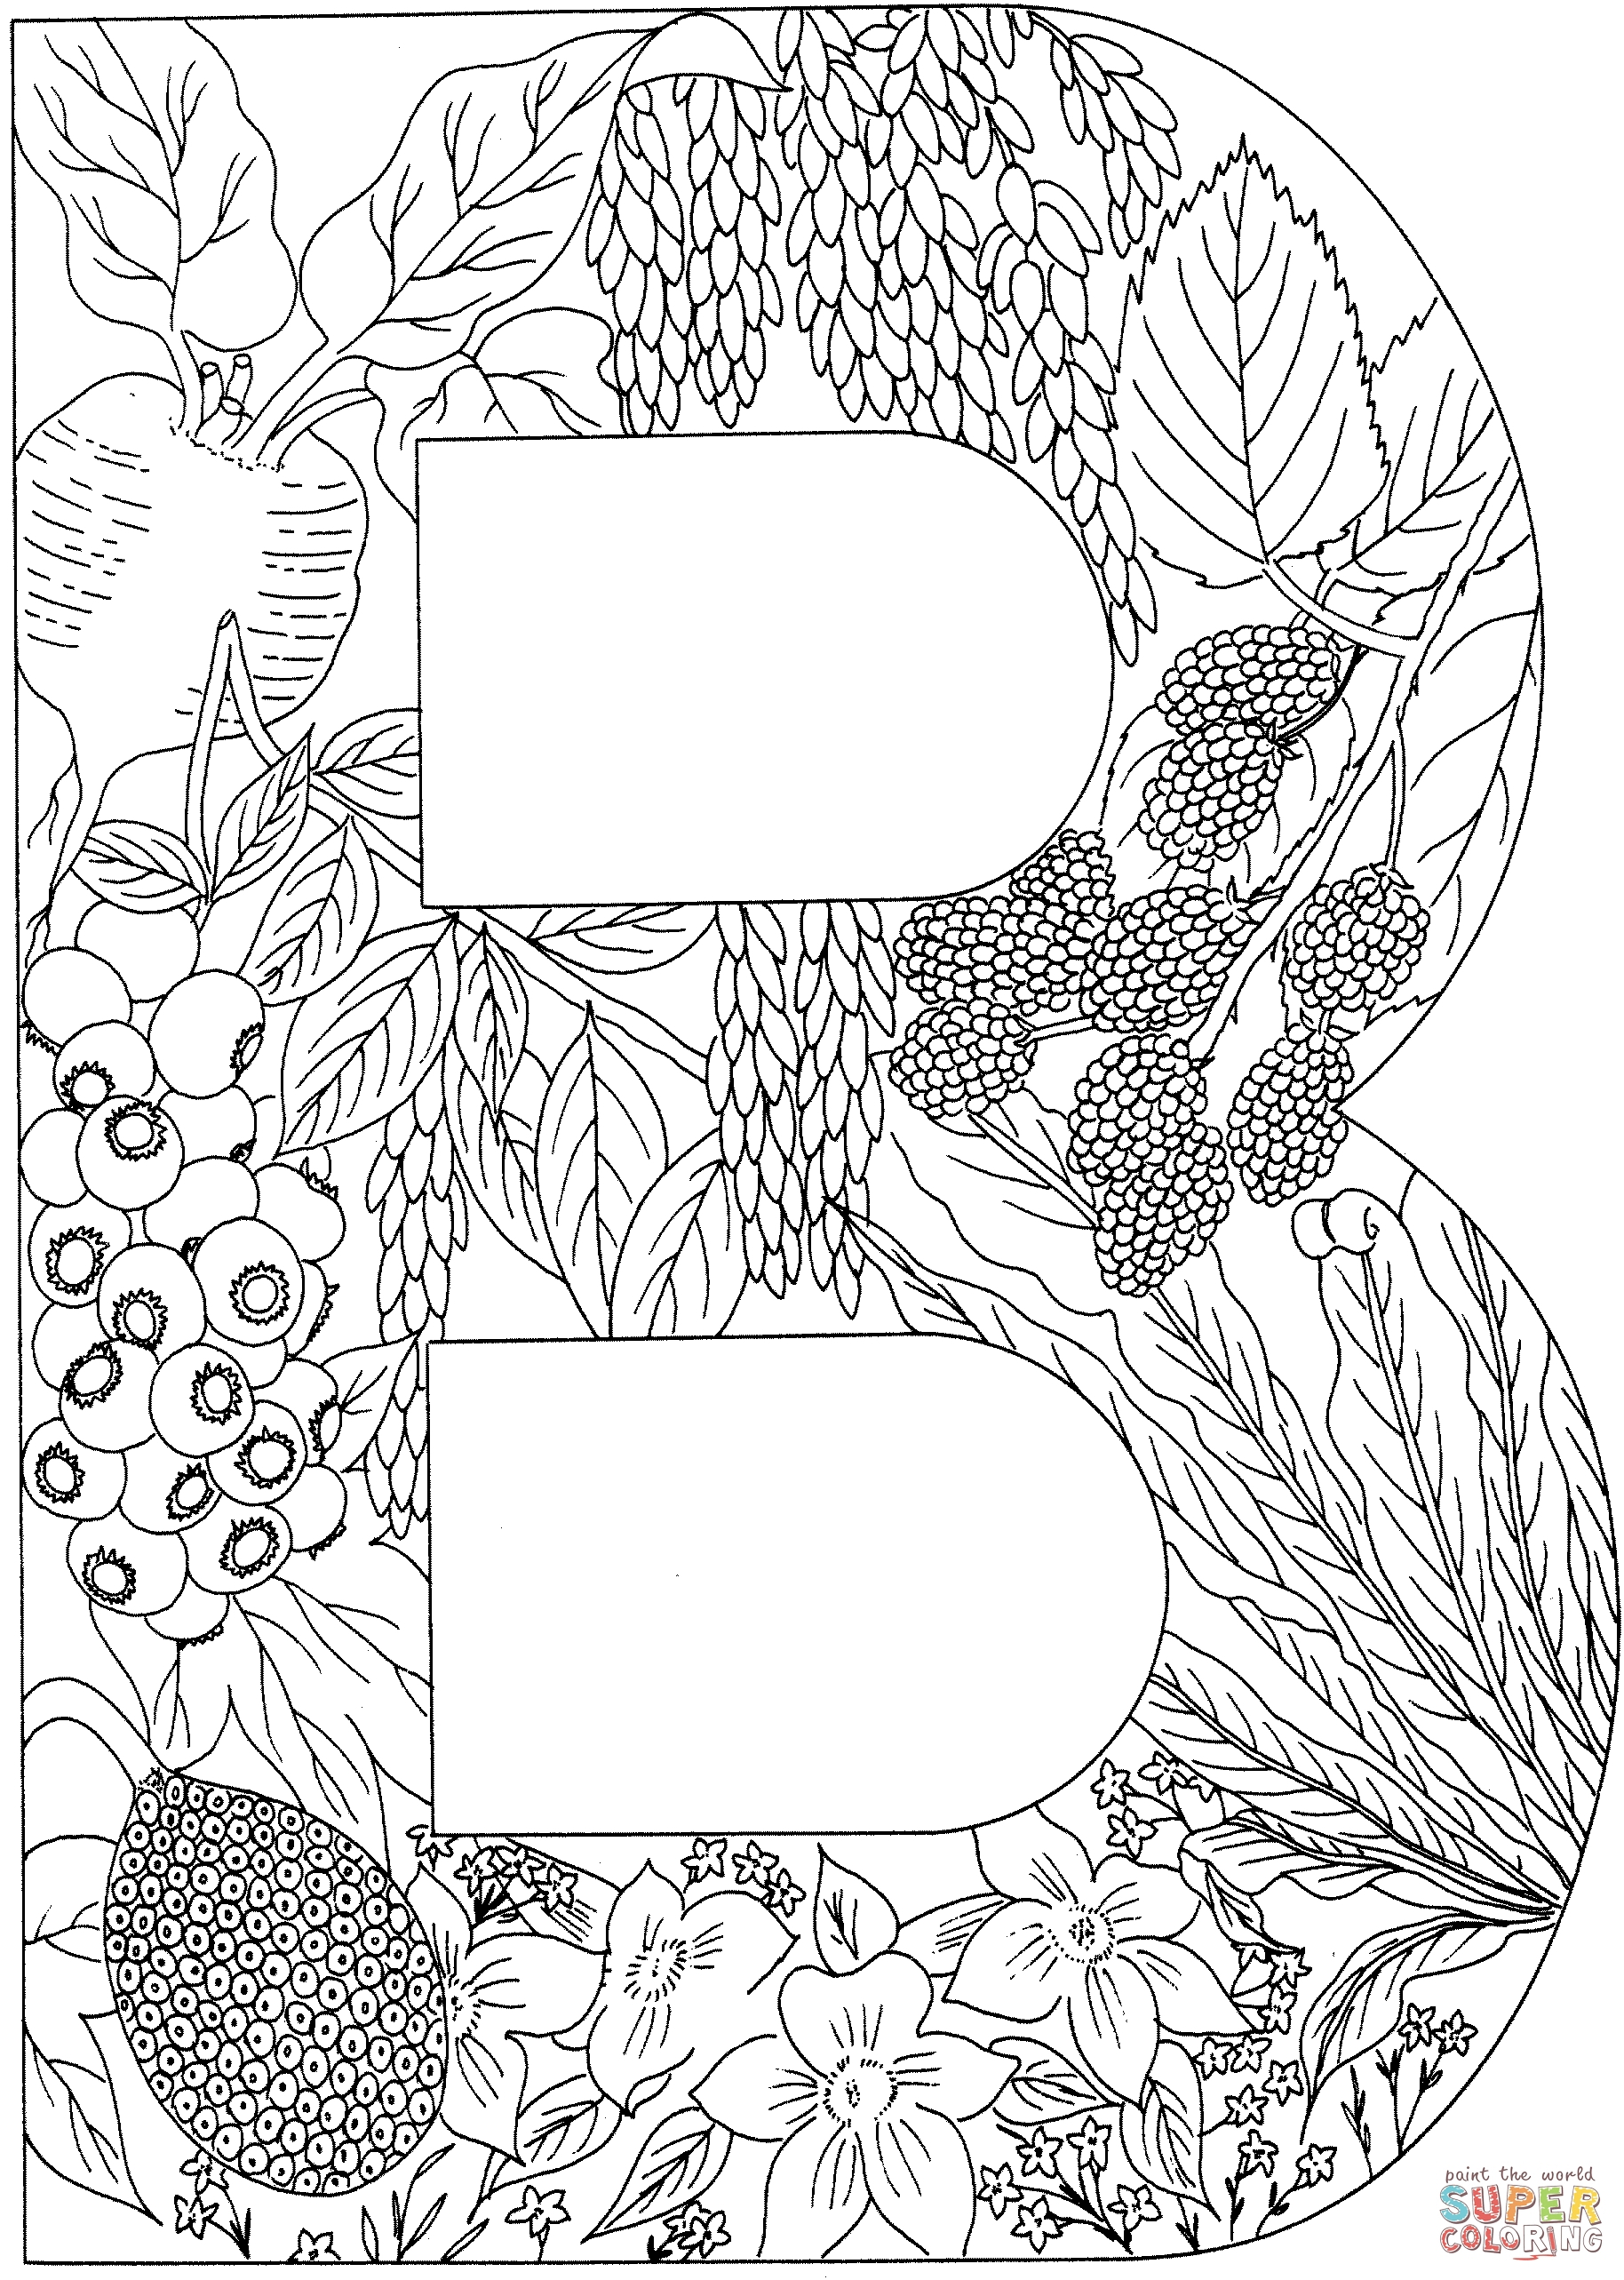 B Coloring Pages Elegant Free Printable Hard Coloring Pages For Adults Letter S